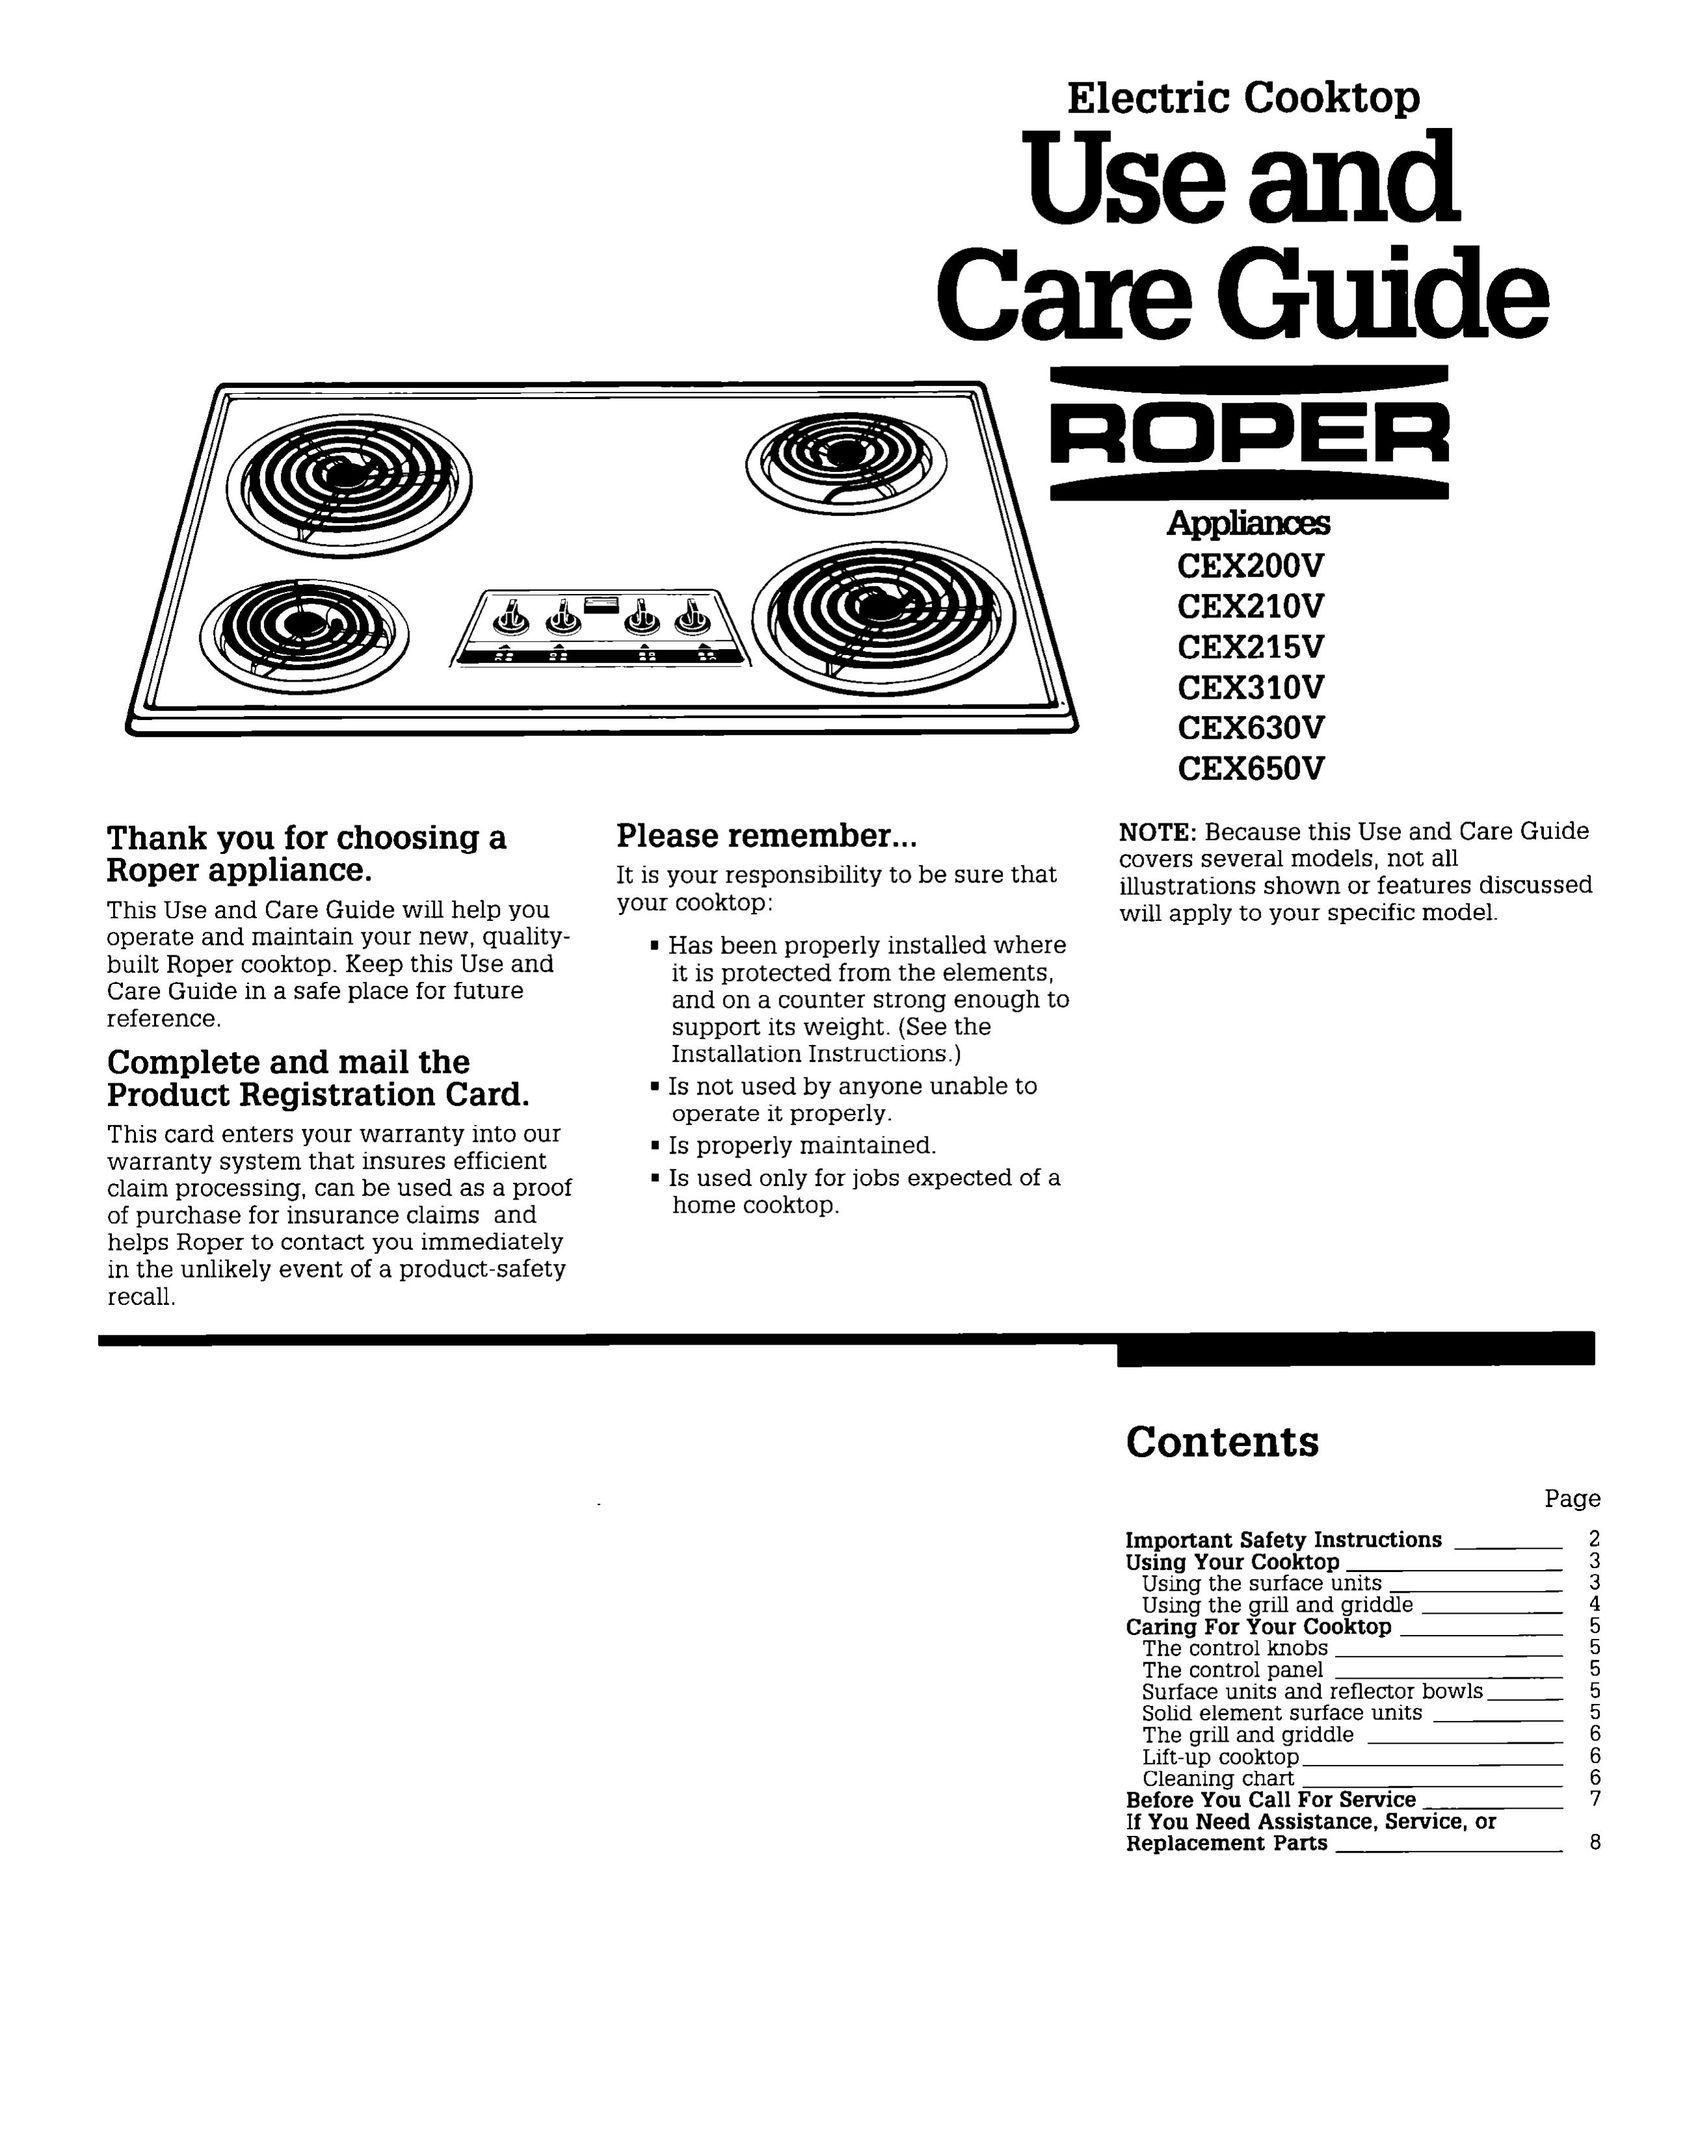 Whirlpool CEX210V Cooktop User Manual